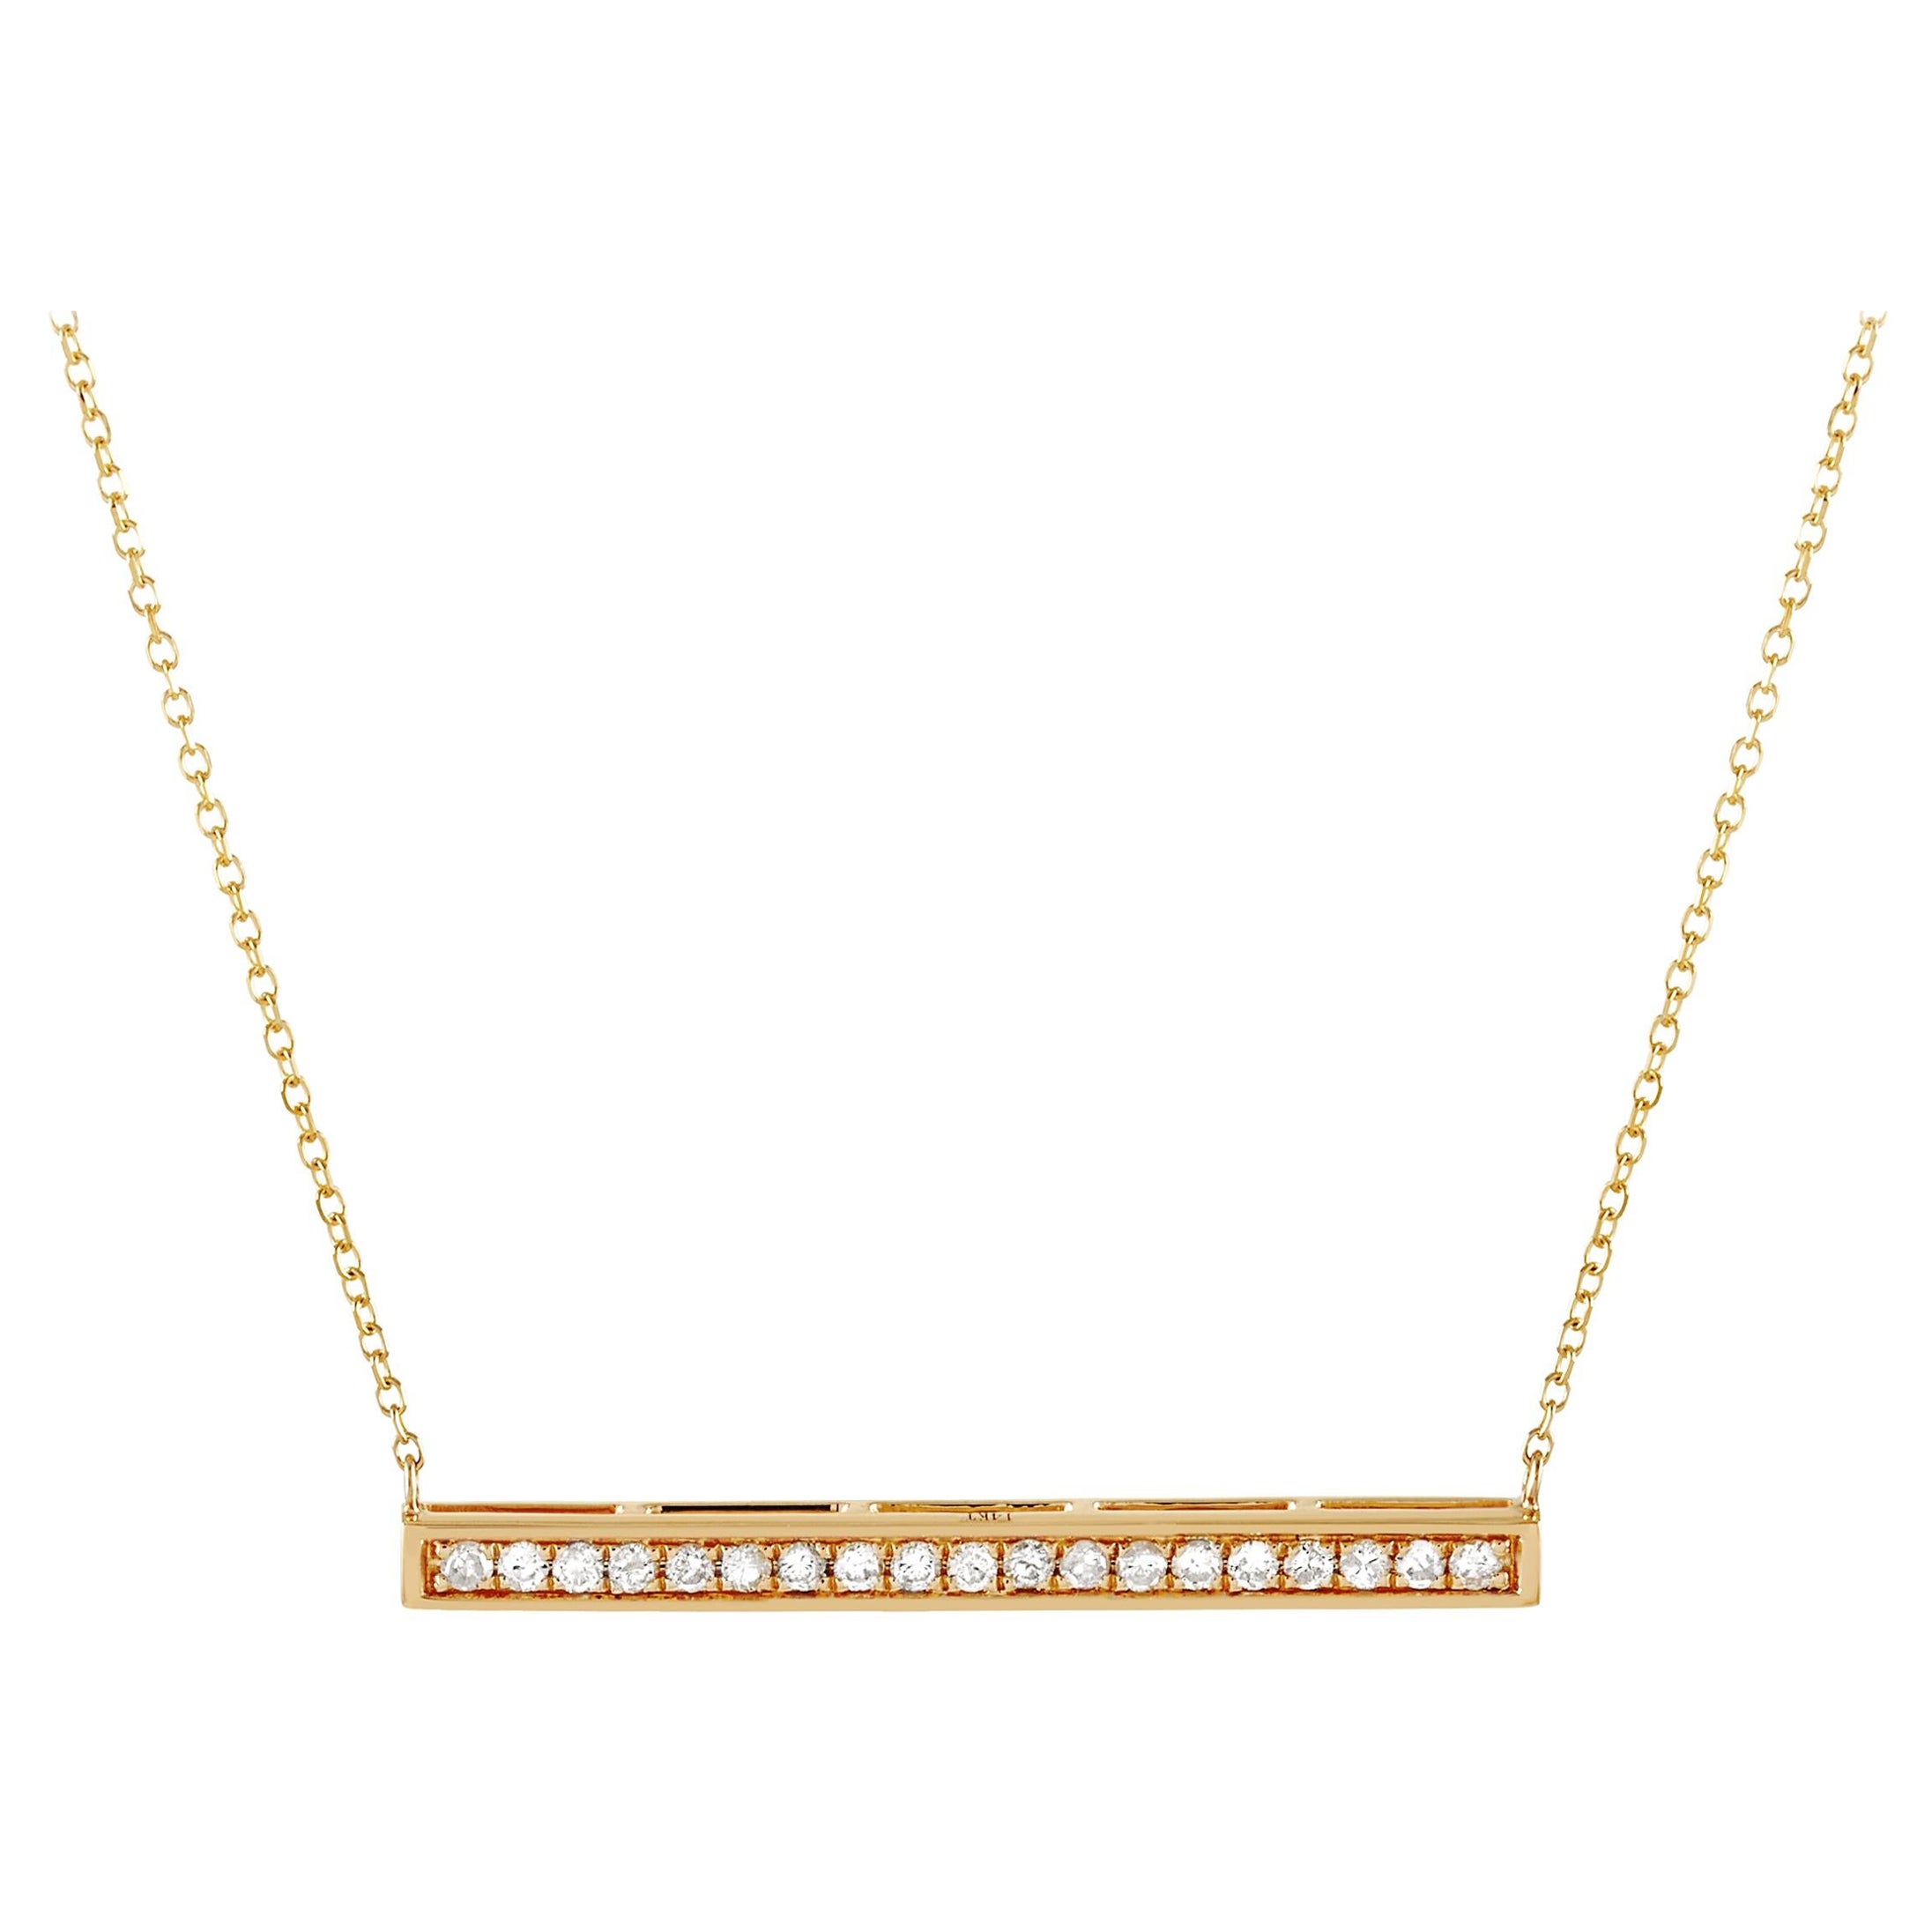 LB Exclusive 14k Yellow Gold 0.25 Carat Diamond Bar Necklace For Sale